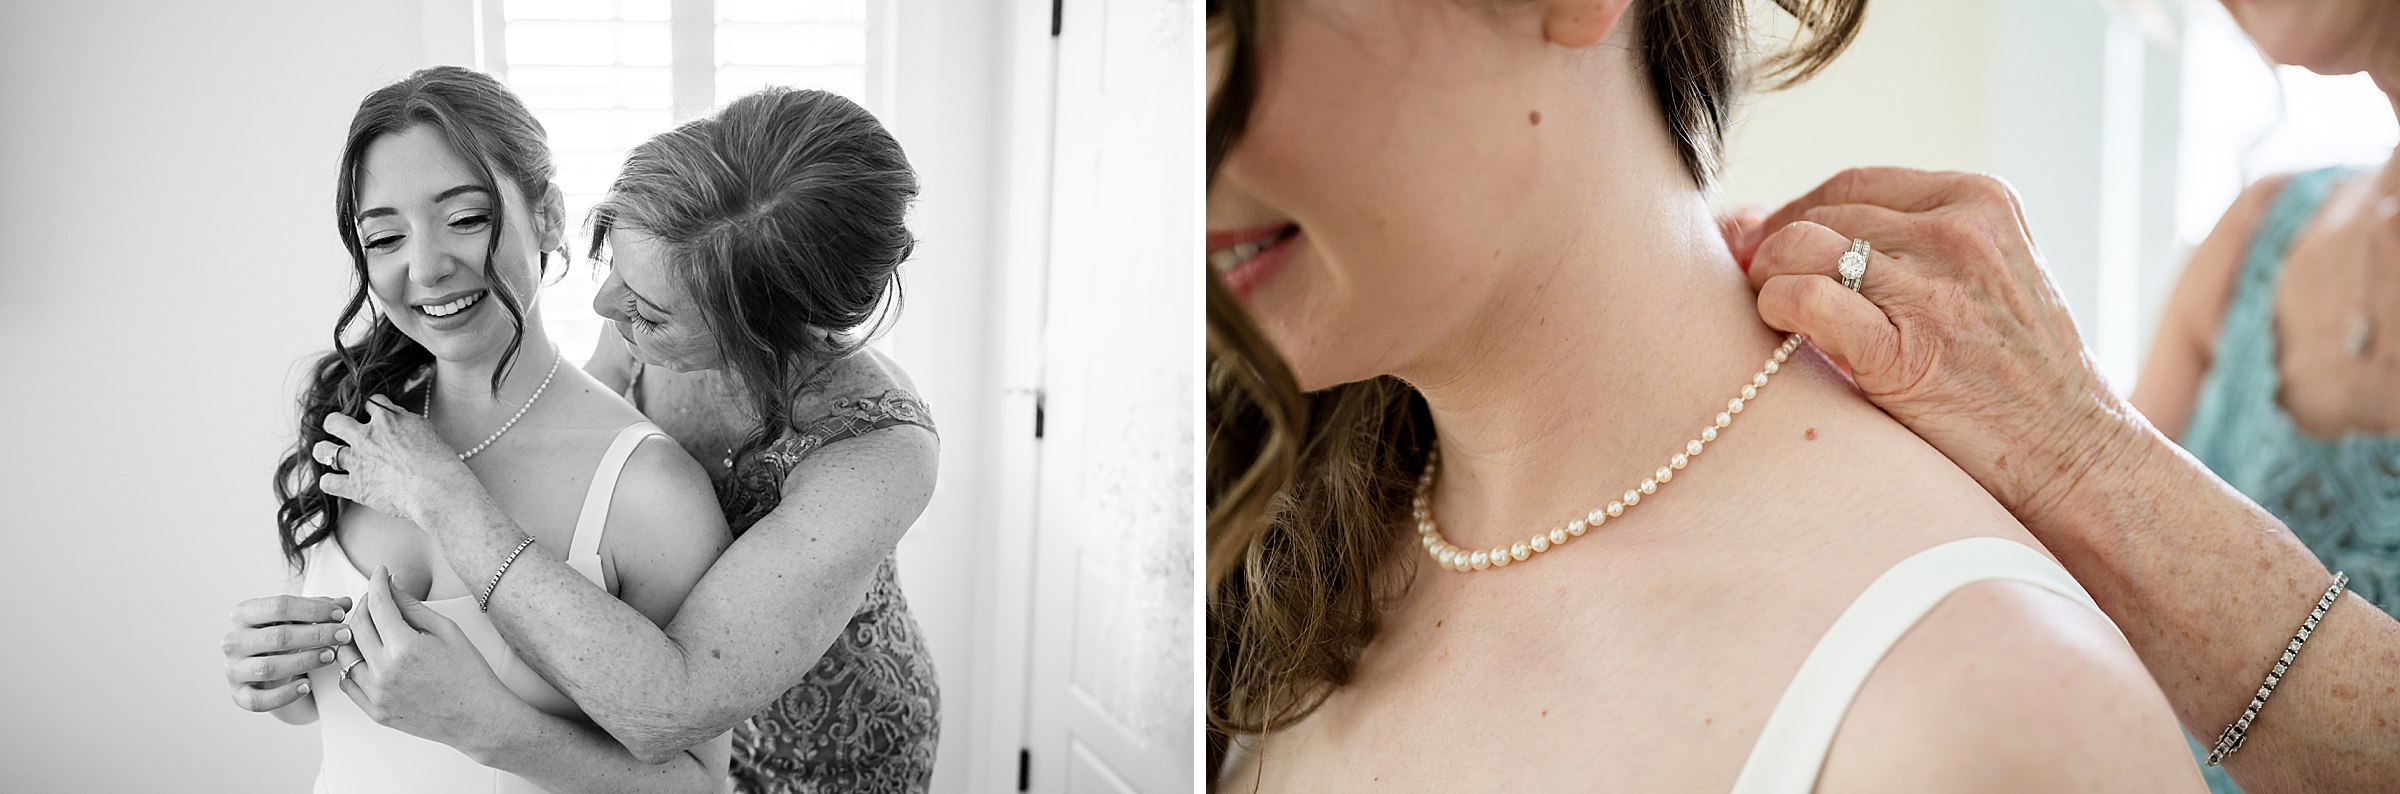 A woman helps a bride put on a pearl necklace in a softly-lit room. Close-up shows hands fastening the necklace. Bride smiles, feeling the necklace being secured.